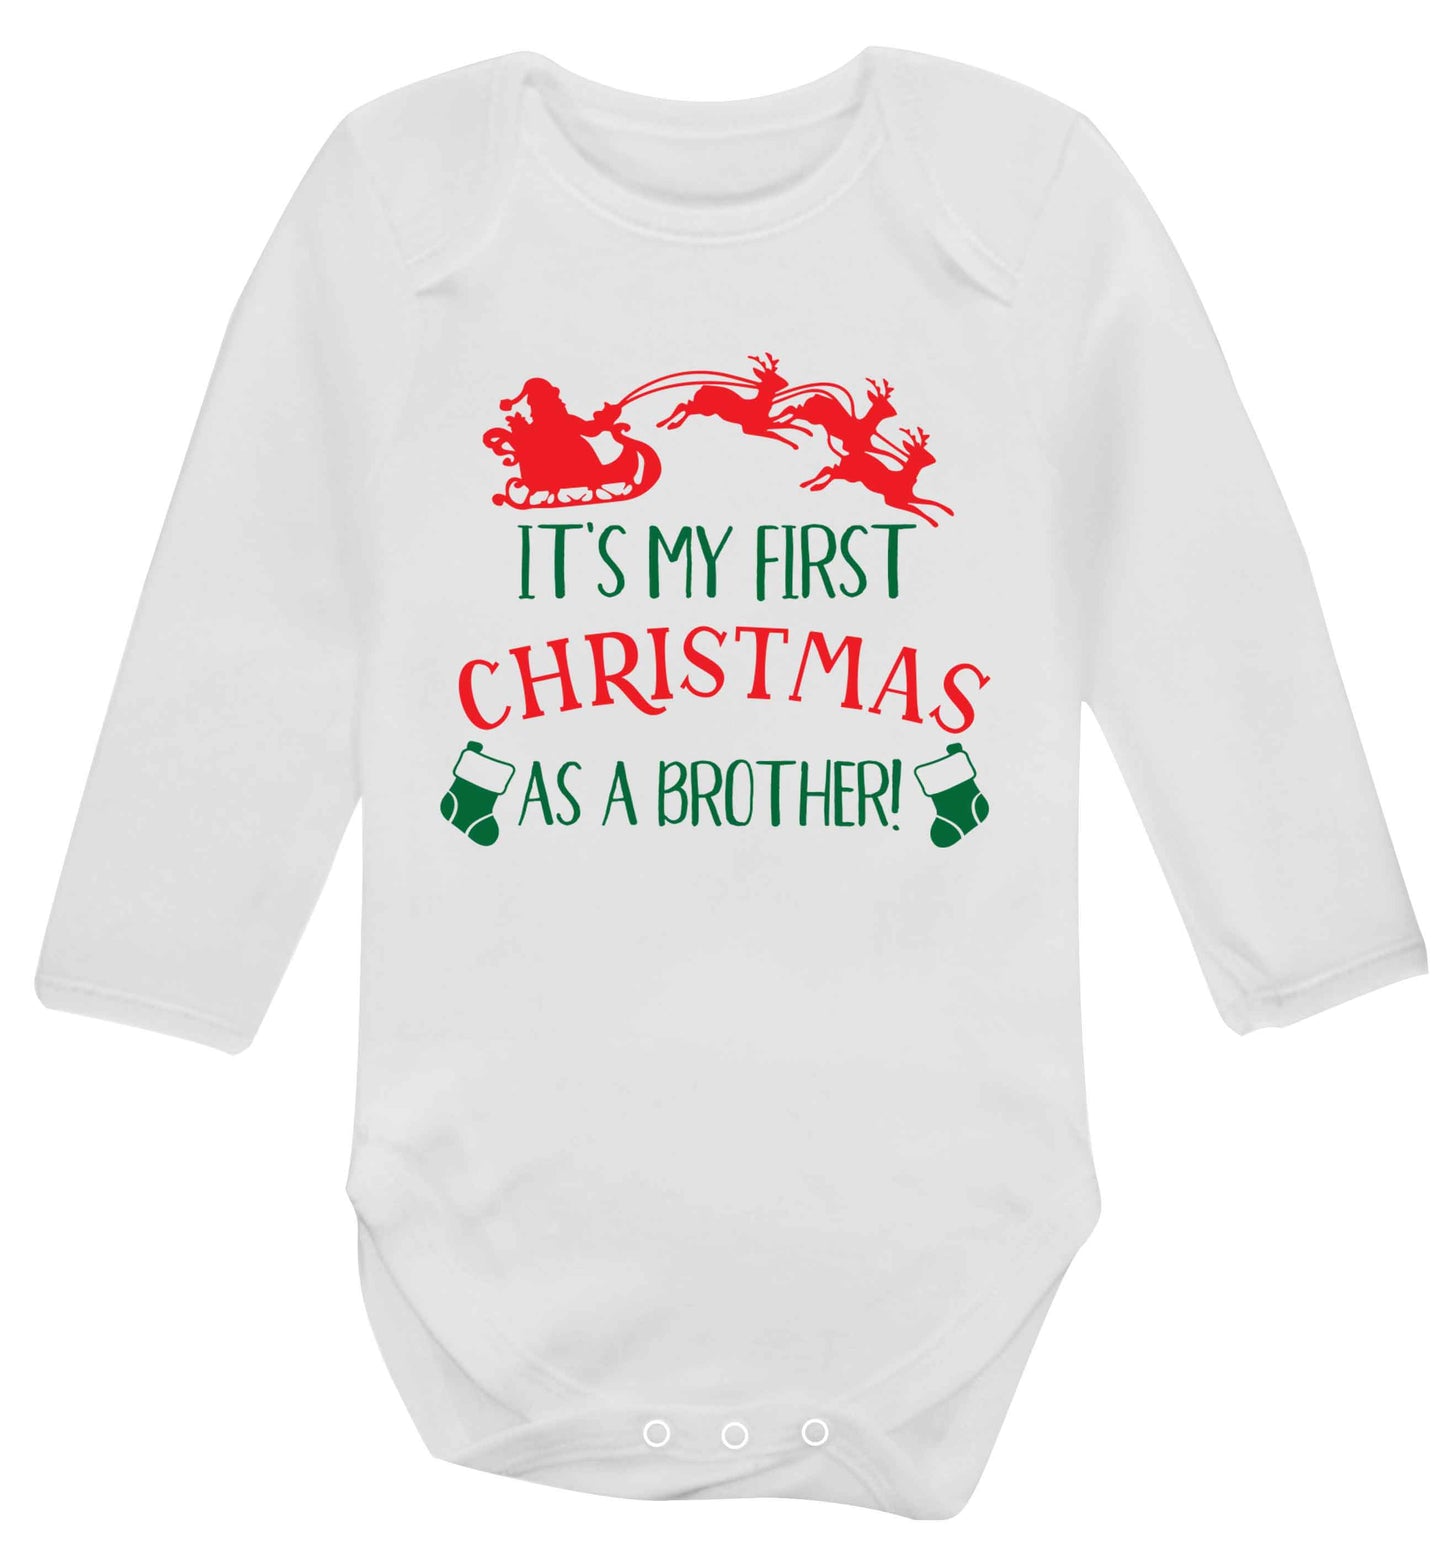 It's my first Christmas as a brother! Baby Vest long sleeved white 6-12 months